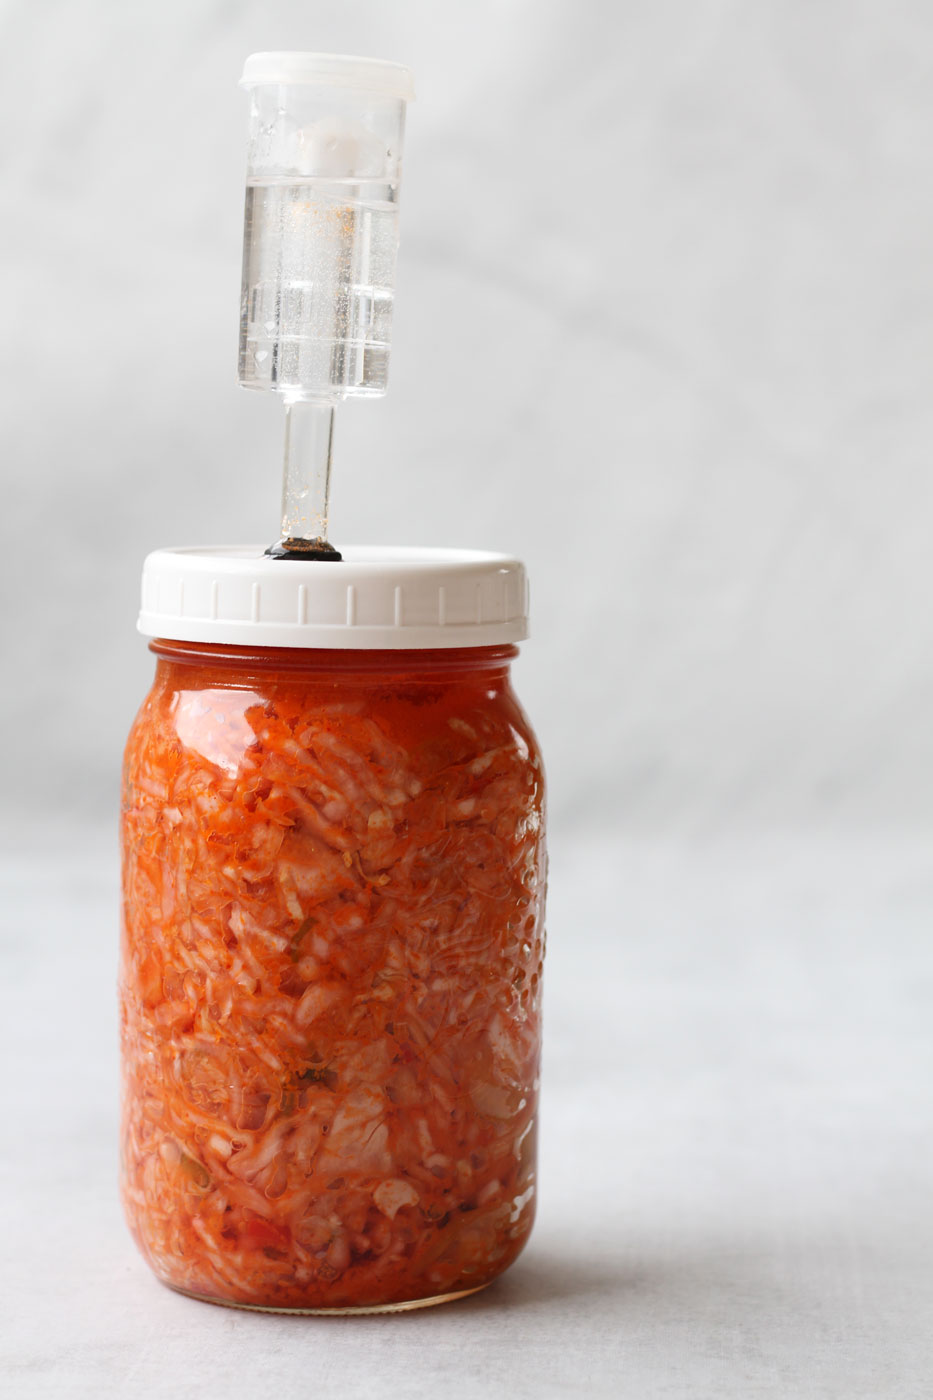 video on how to make kimchi by active vegetarian